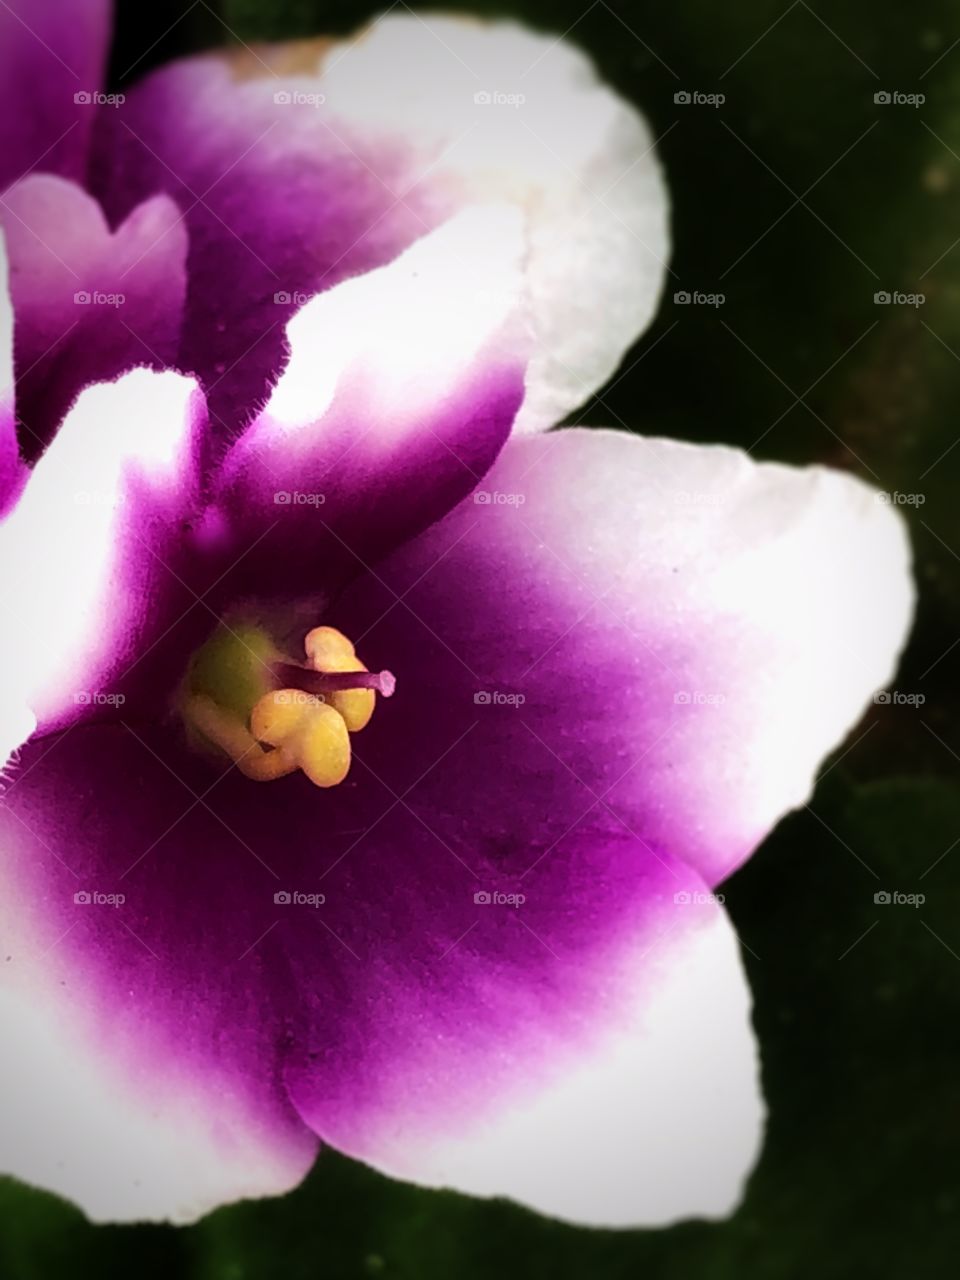 A close up in a Violet, in a garden. The small, exquisite and delicate details captured.